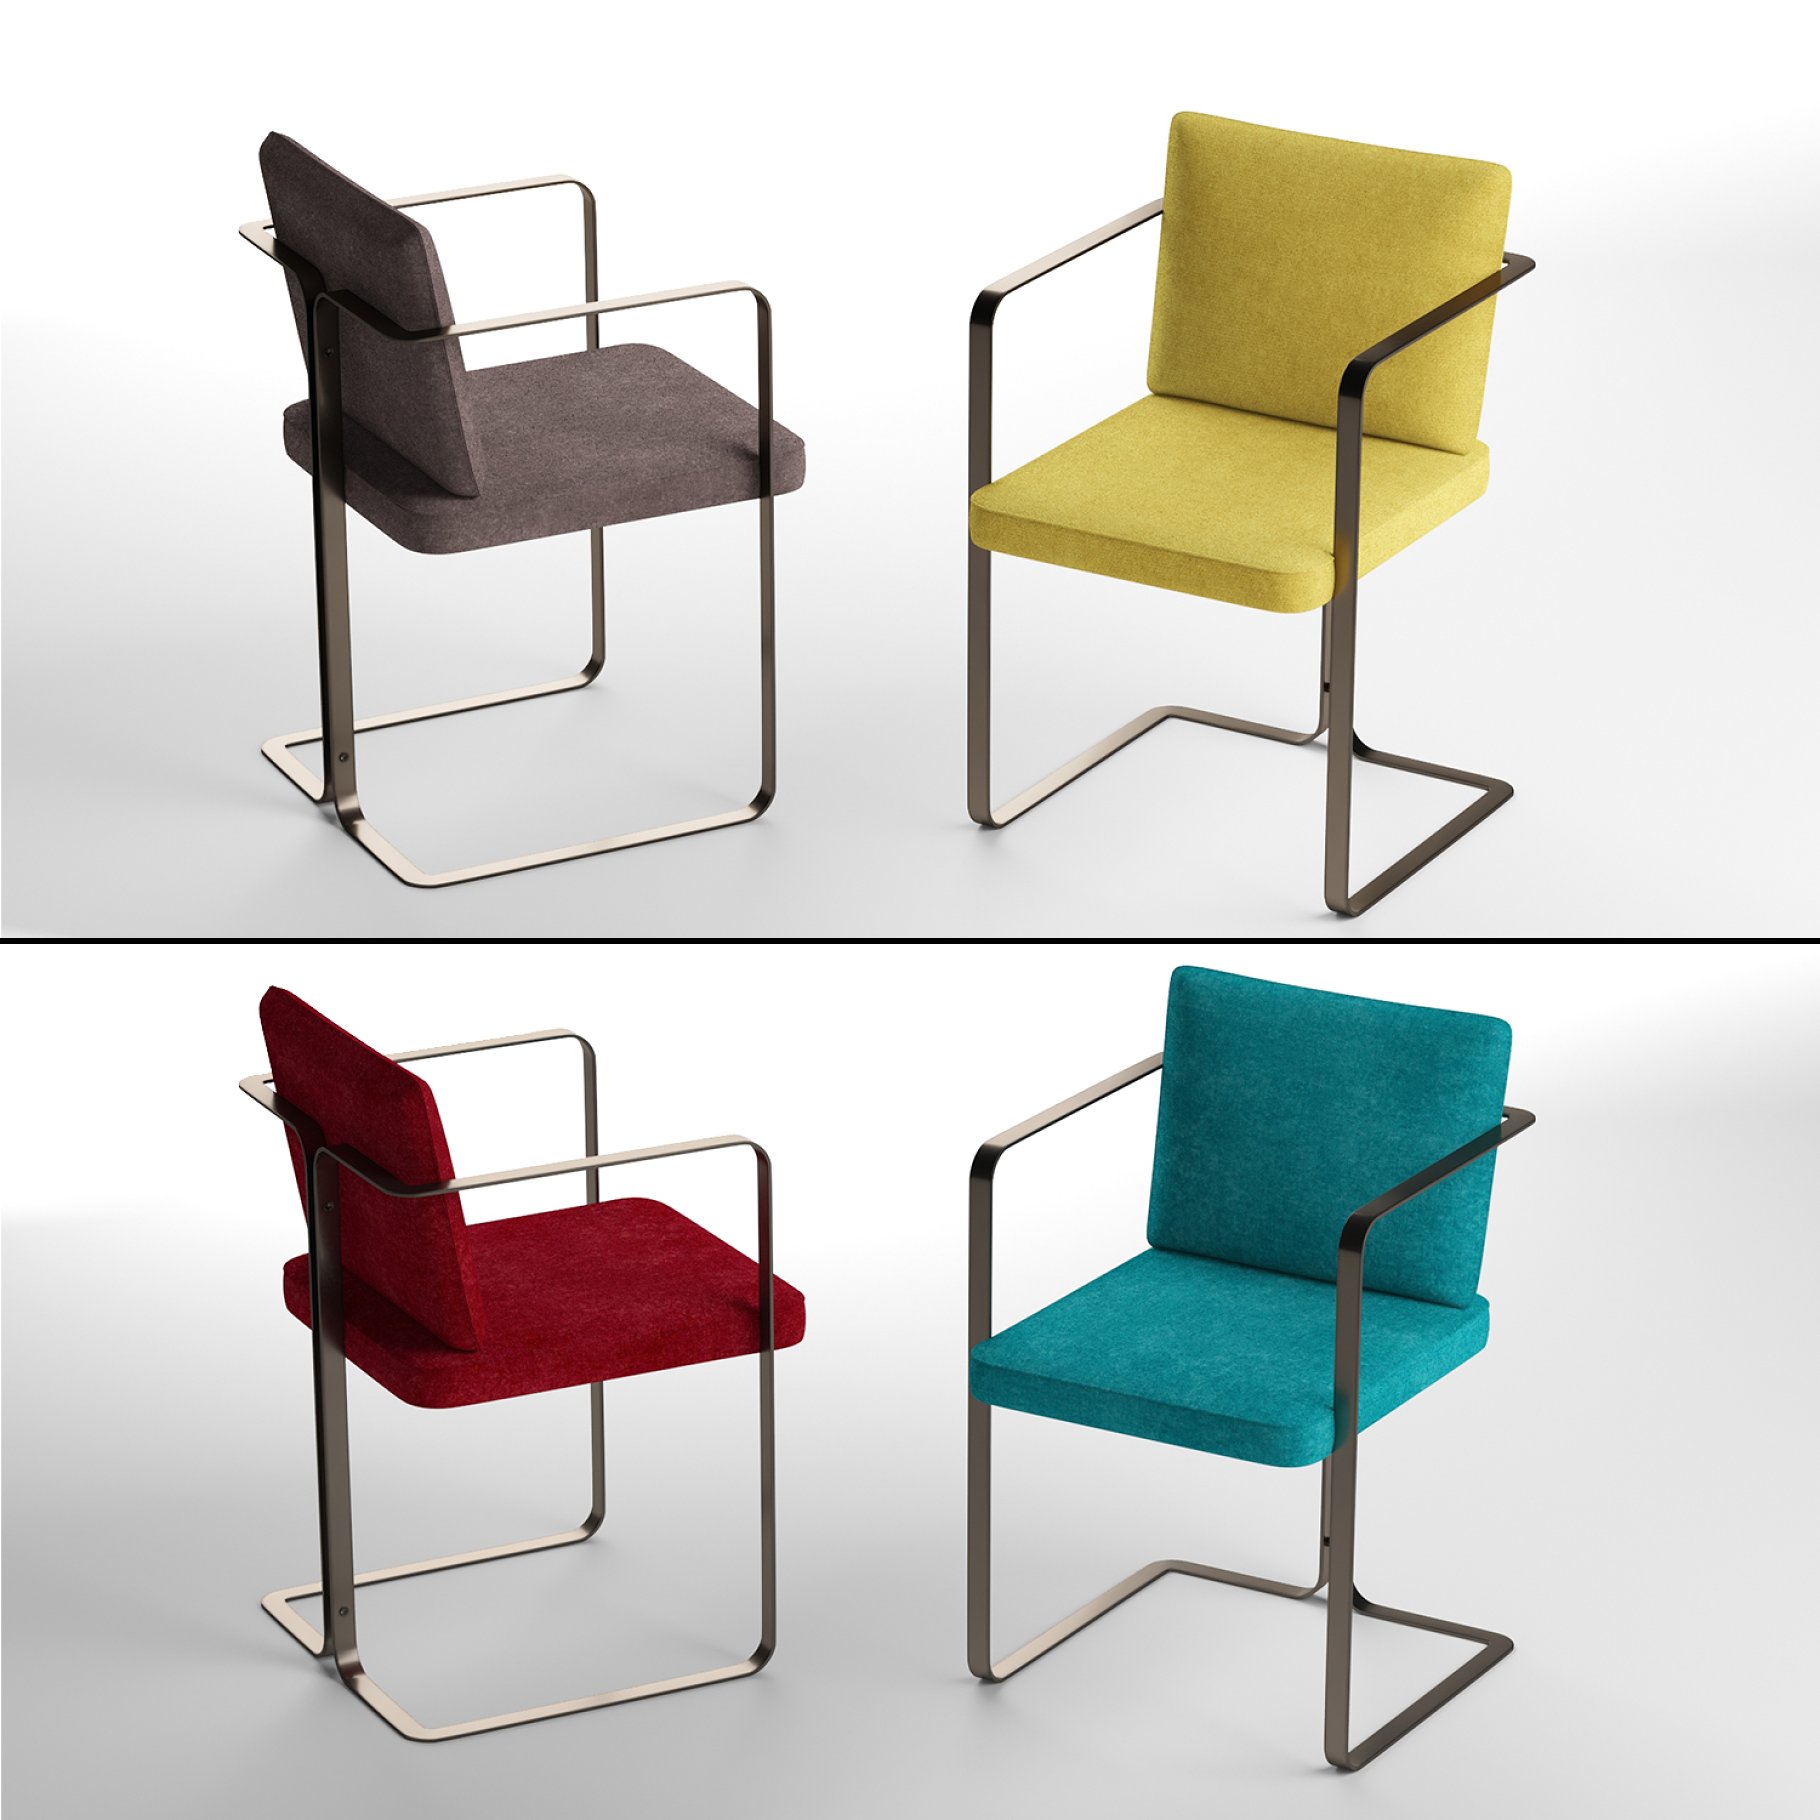 Rendering of a gorgeous 3d model of an armchair with in various colors